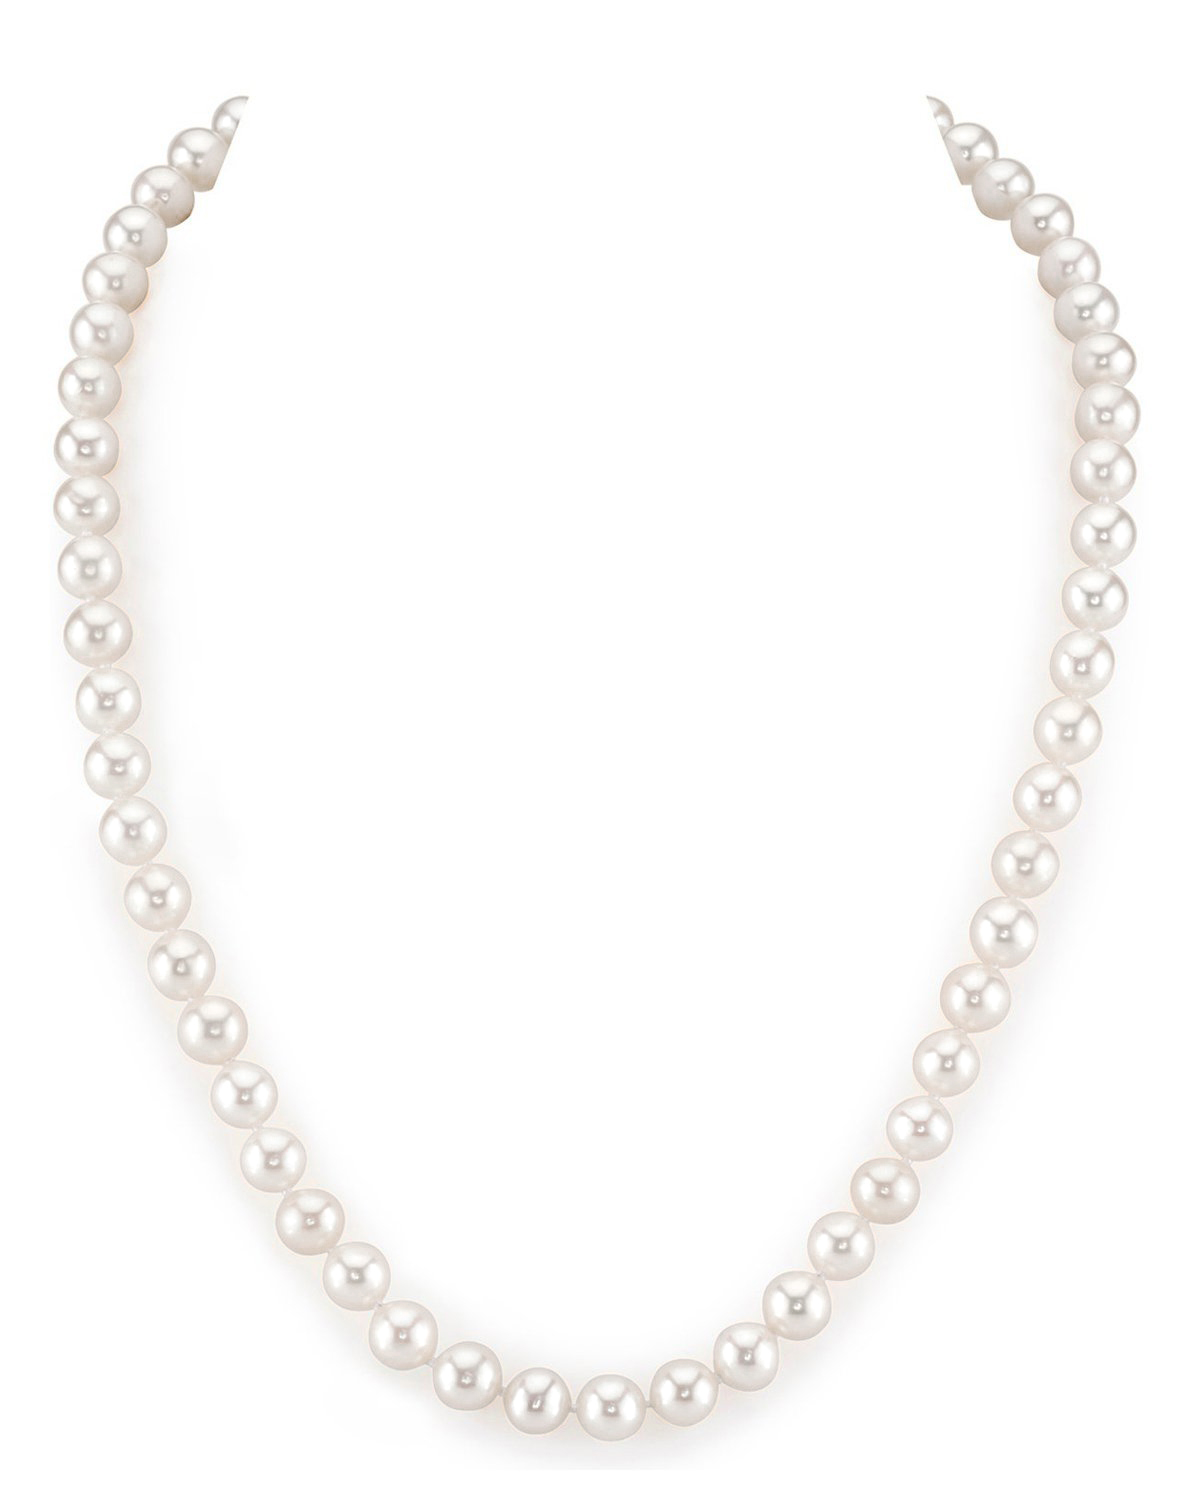 7.0-7.5mm White Freshwater Pearl Necklace - AAAA Quality